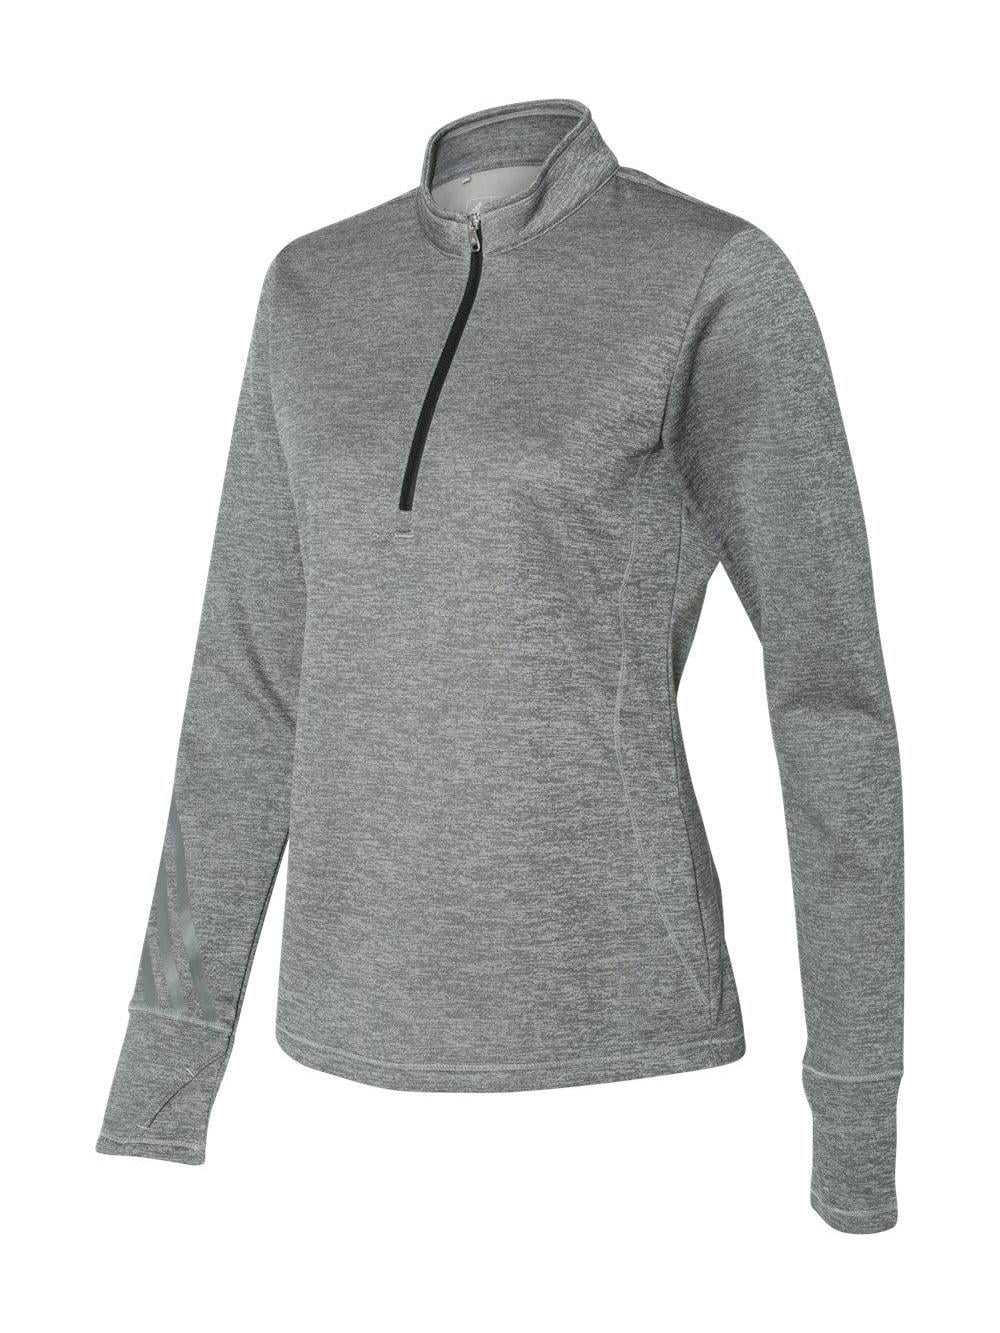 Adidas - Women's Brushed Terry Heathered Quarter-Zip Pullover - A285 ...